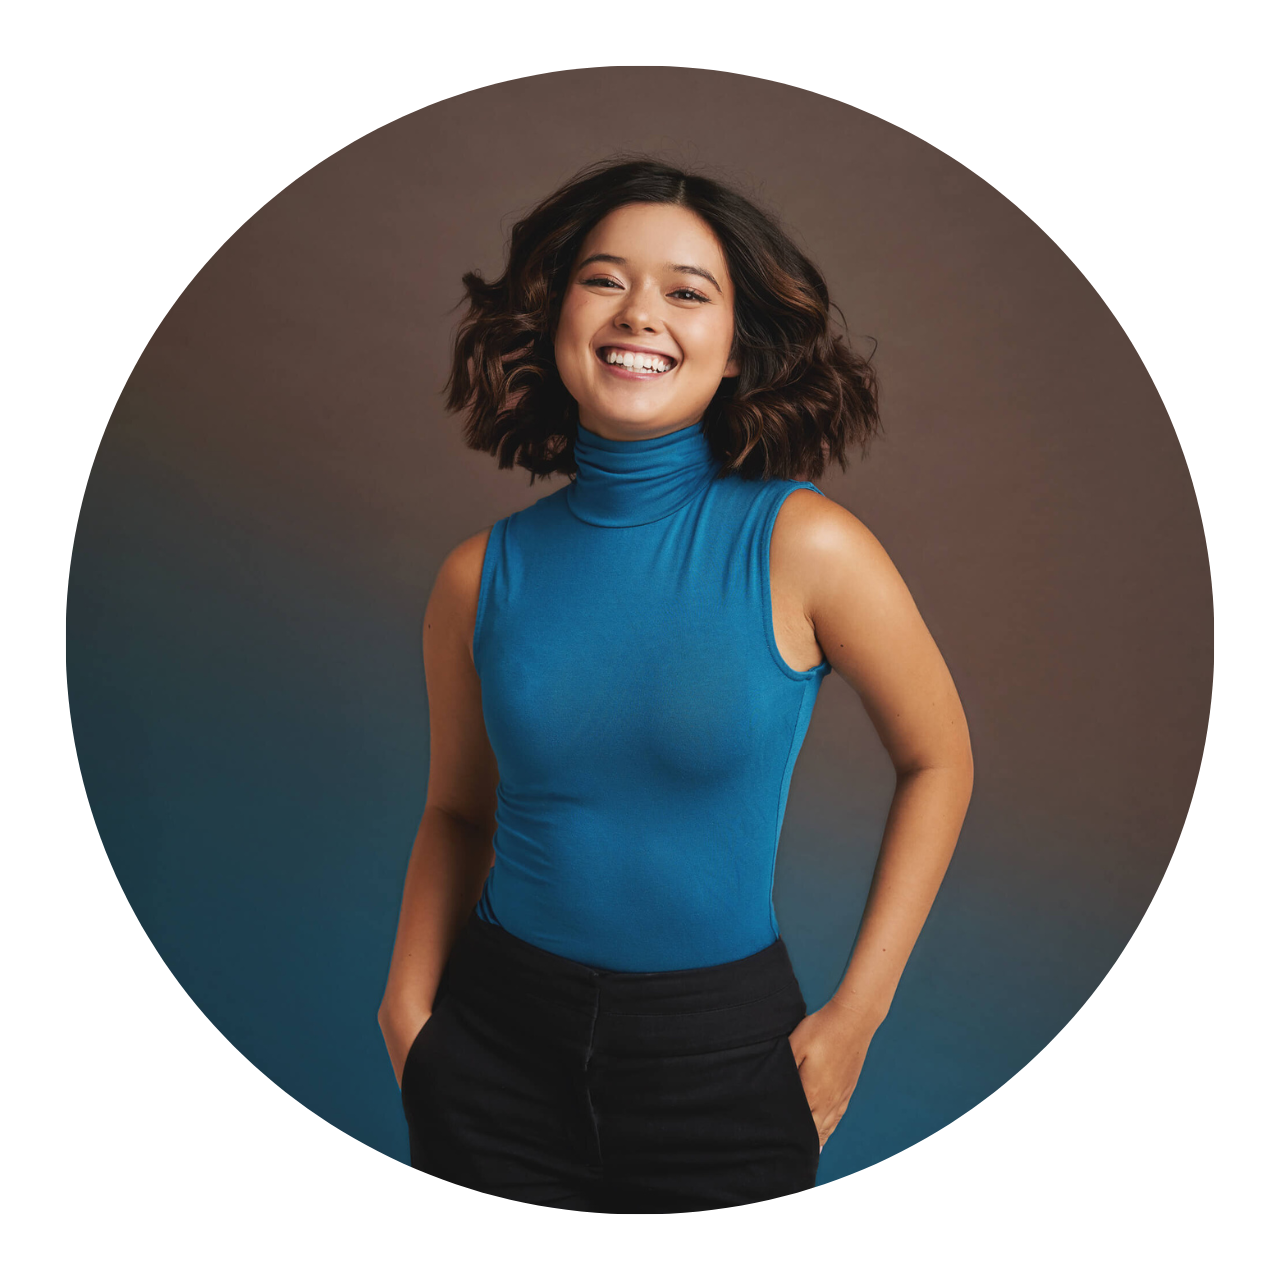 Joyful woman in a blue turtleneck against a brown background with a blue gradient.